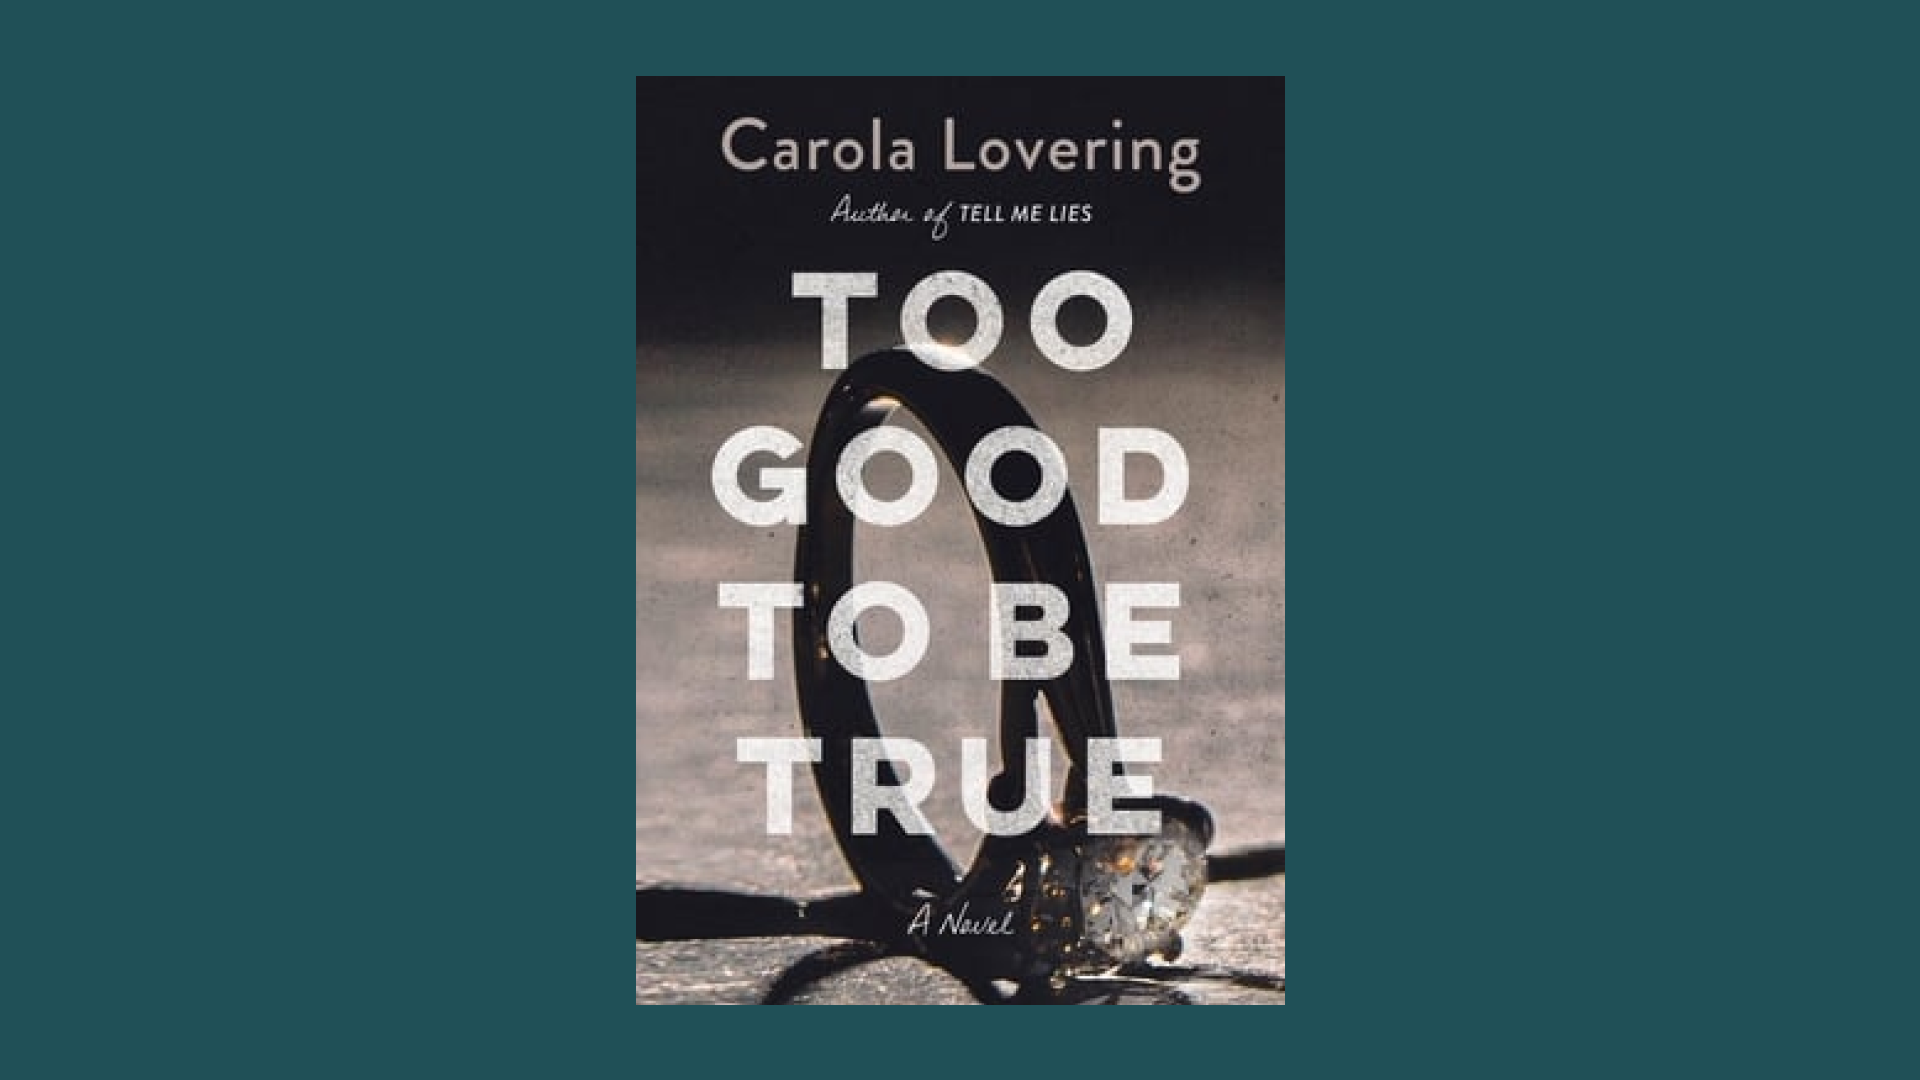 “Too Good to Be True” by Carola Lovering